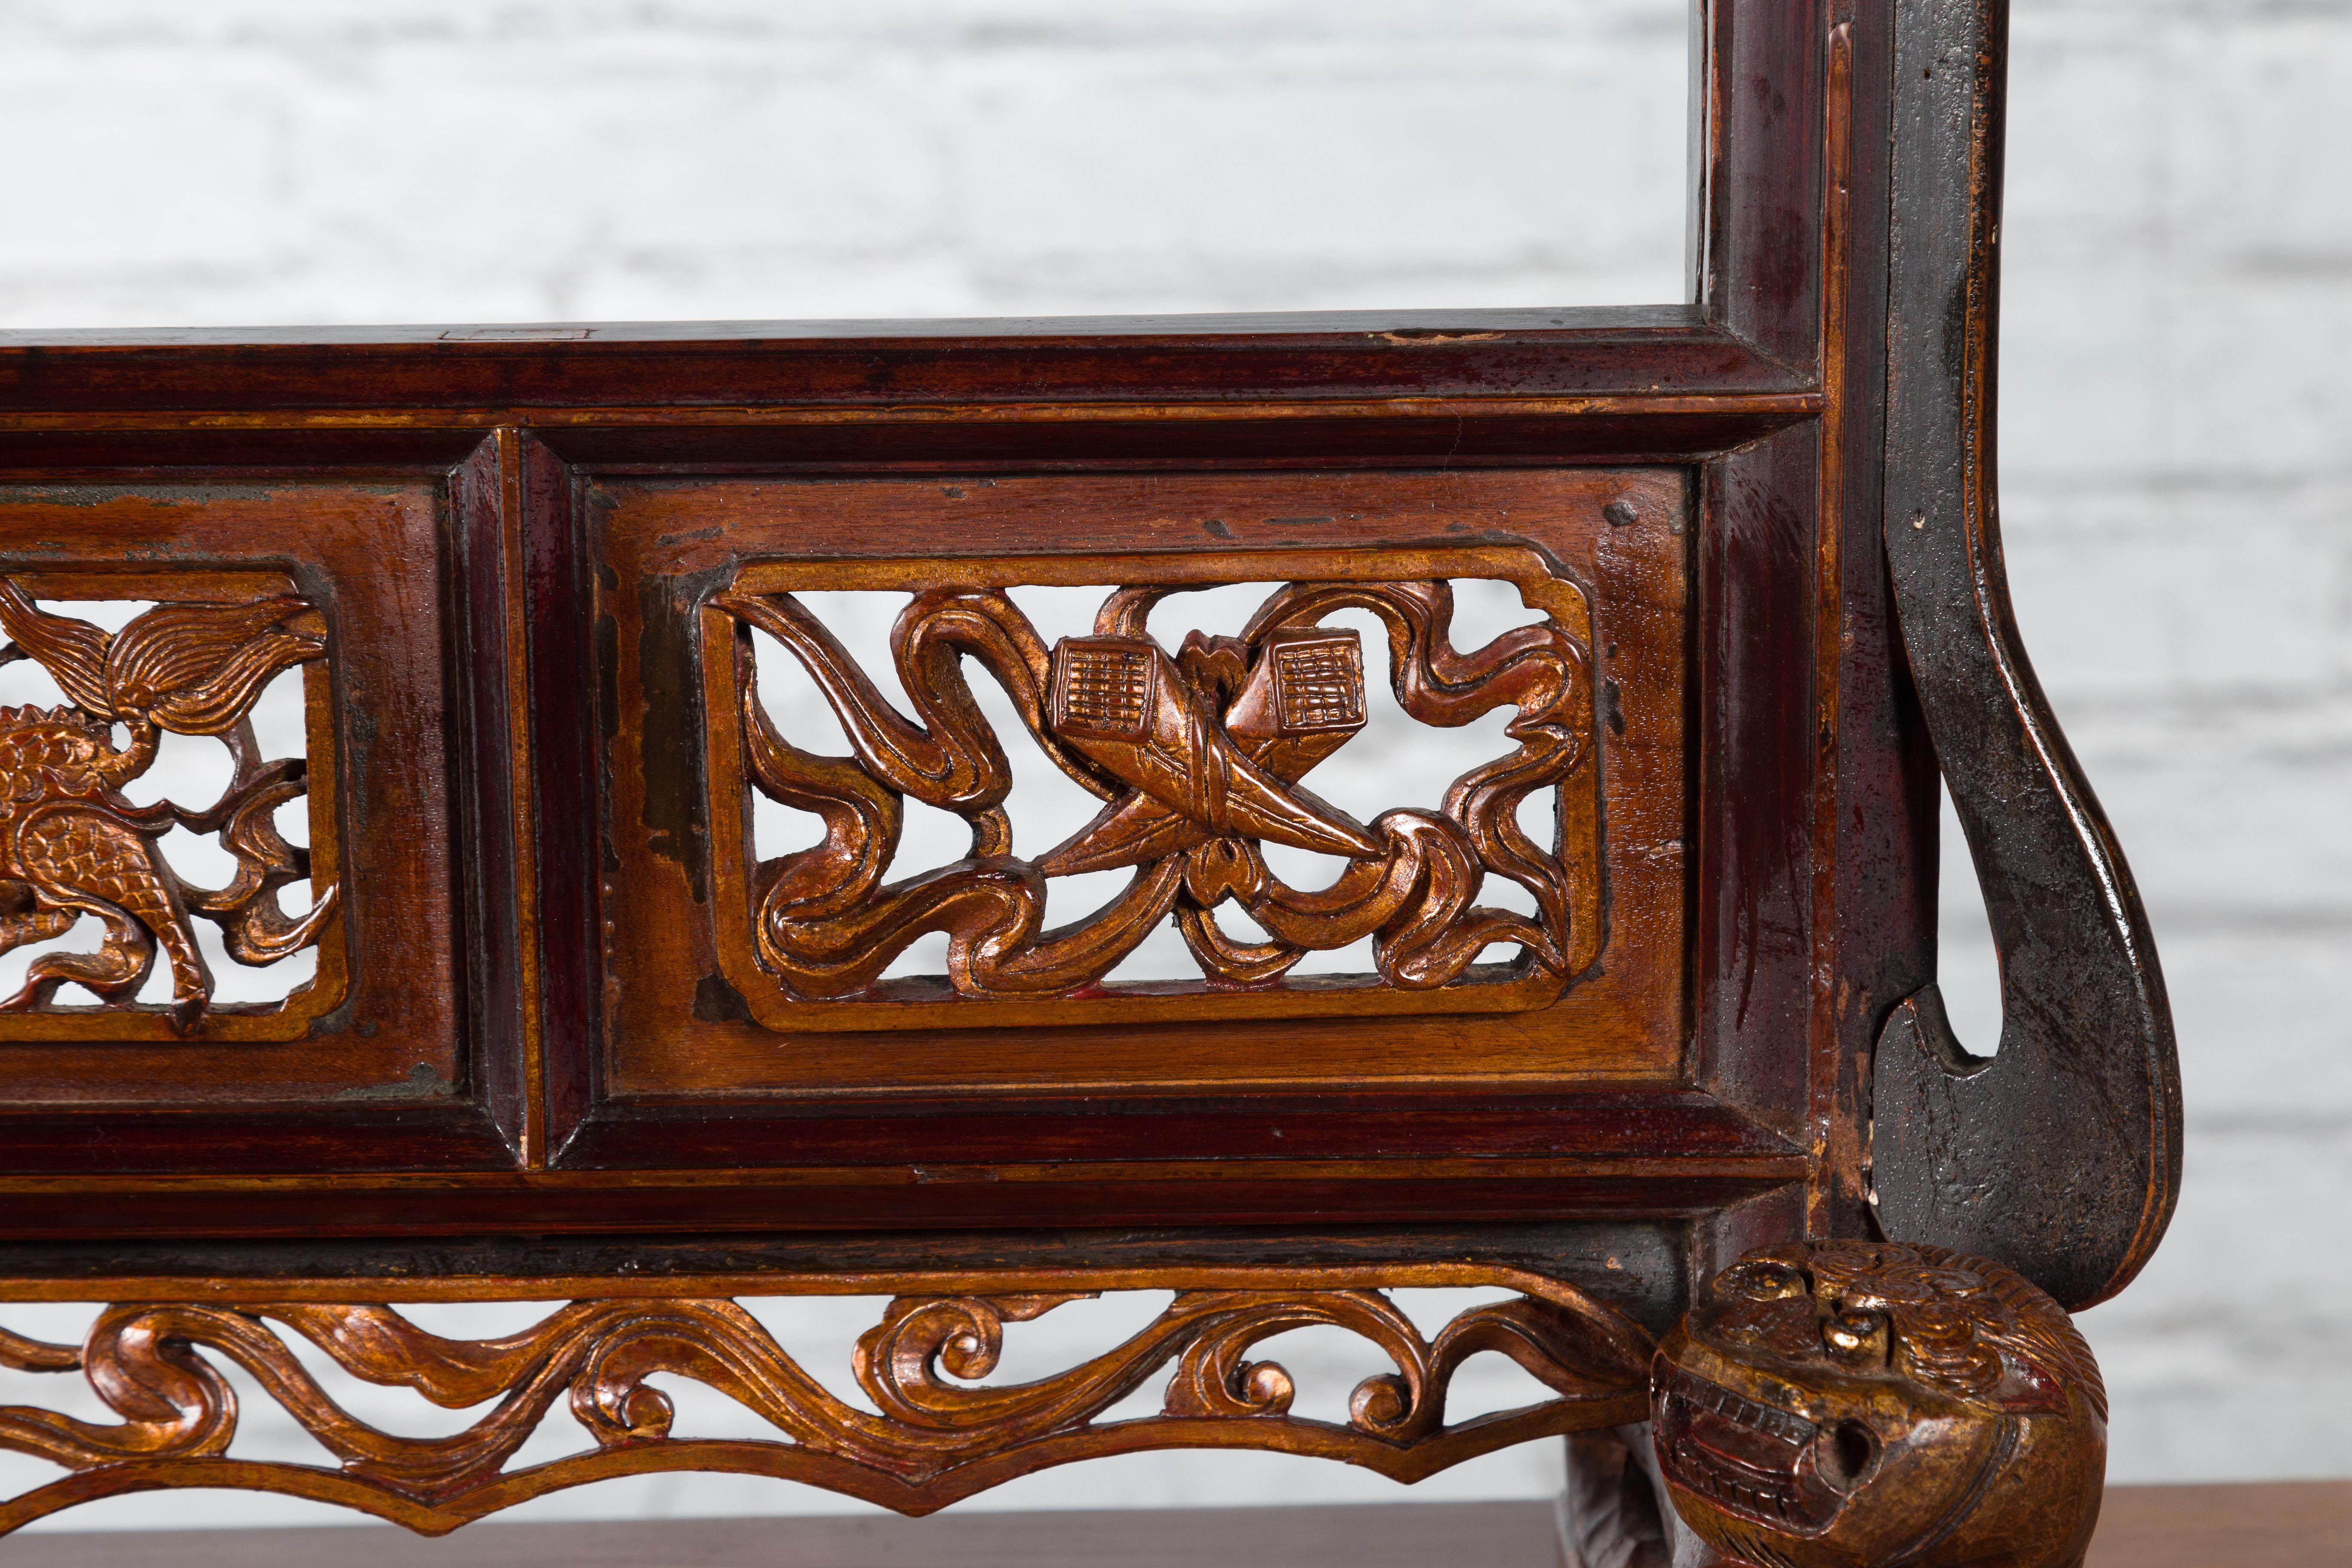 Chinese Qing Dynasty 18th Century Mirror Frame with Hand-Carved Mythical Motifs 2